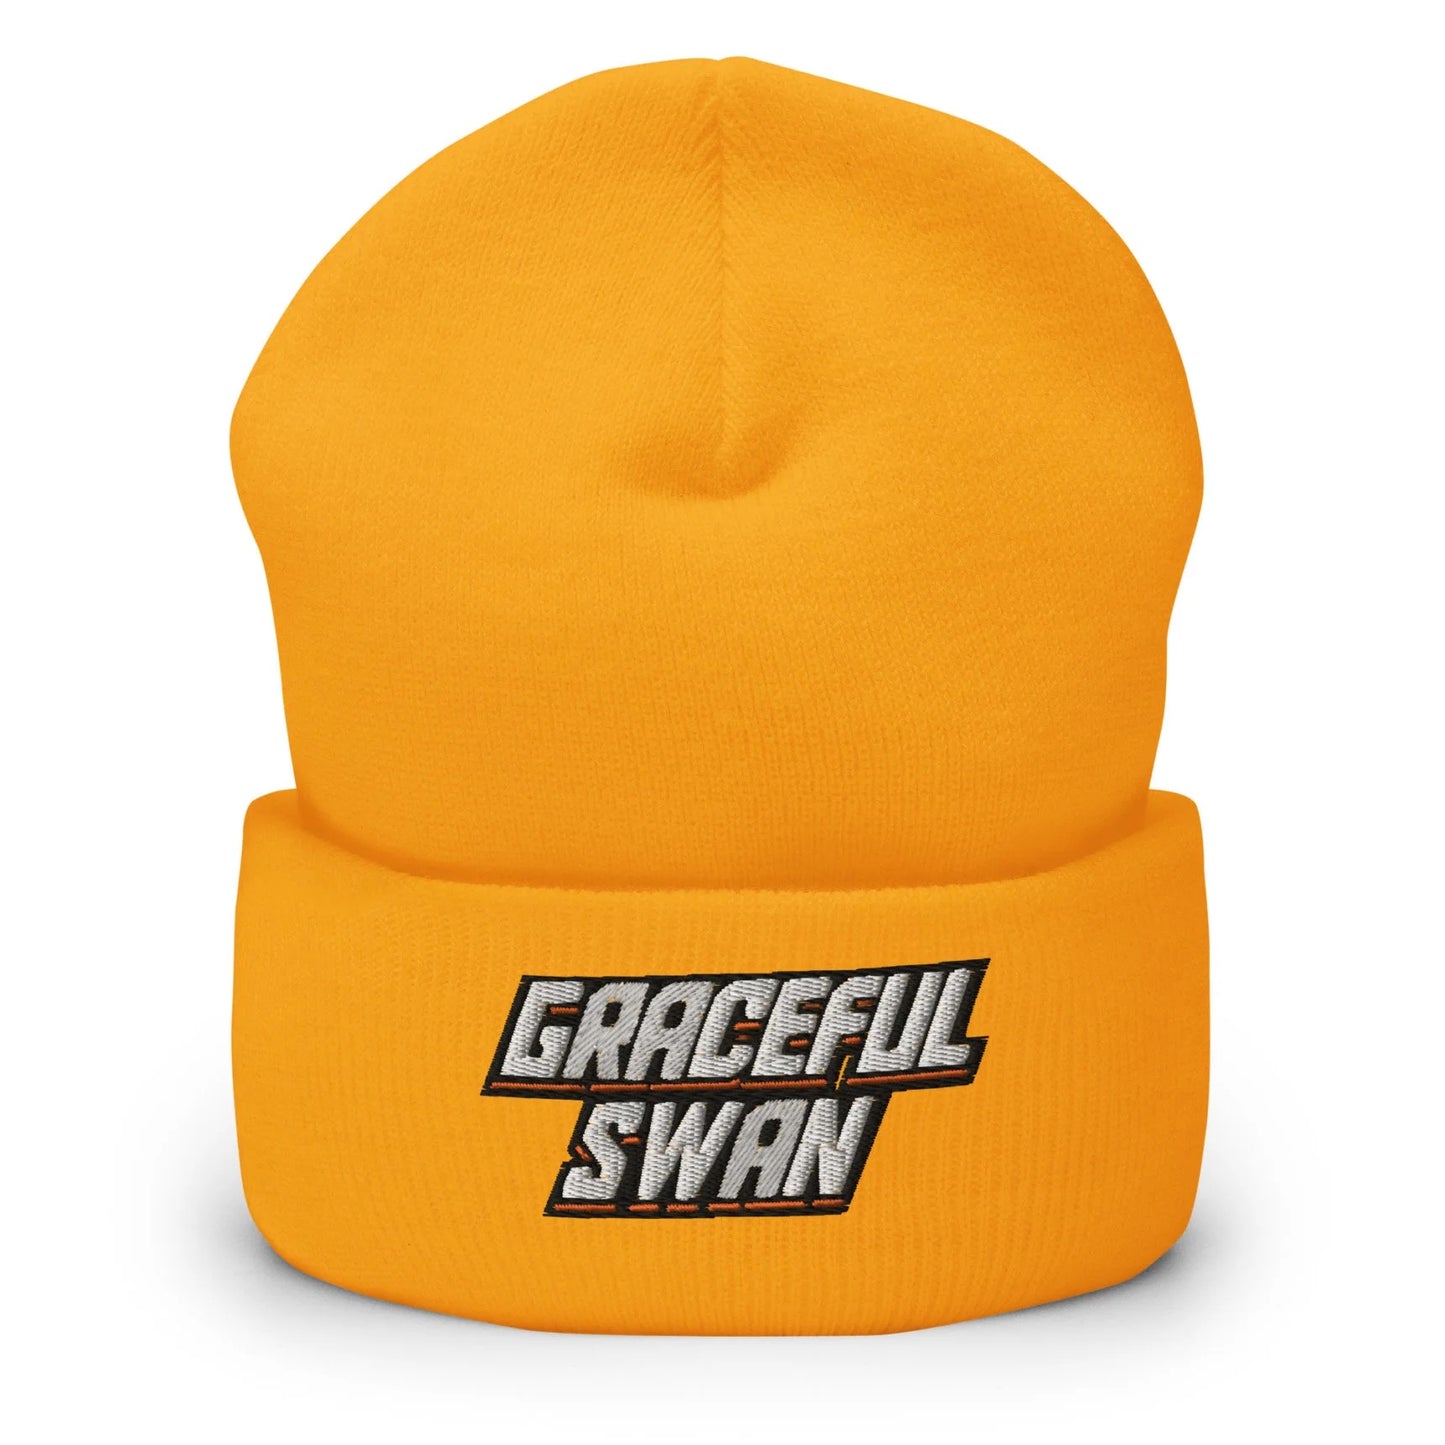 Graceful Swan Beanie by ShowZone in gold with text logo